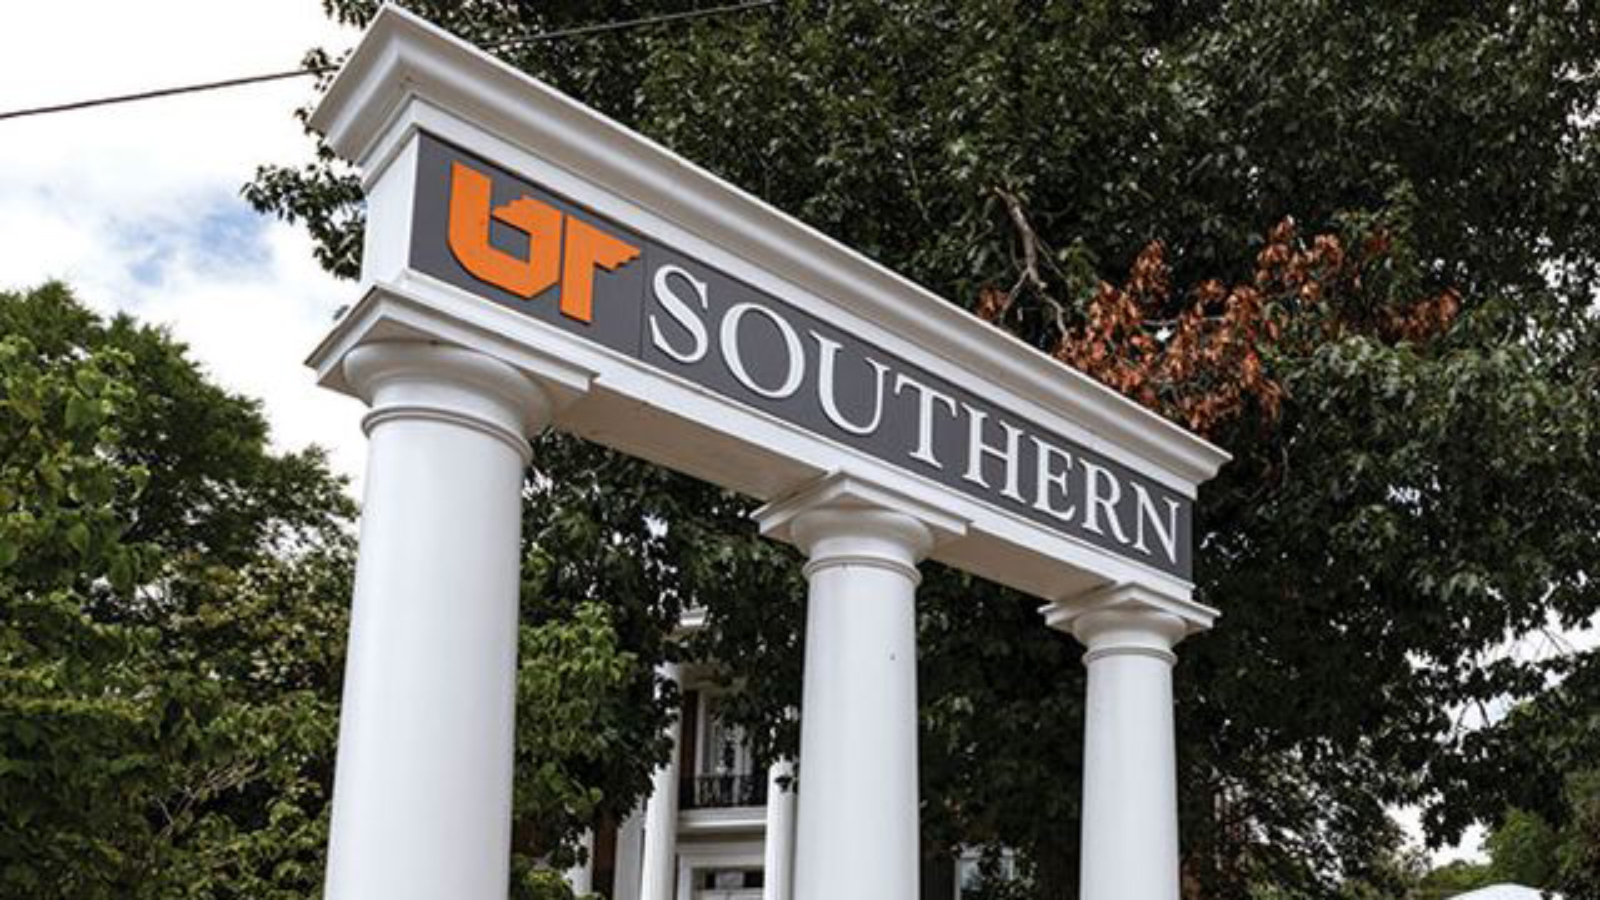 Book tells the story of the takeover of UT Southern